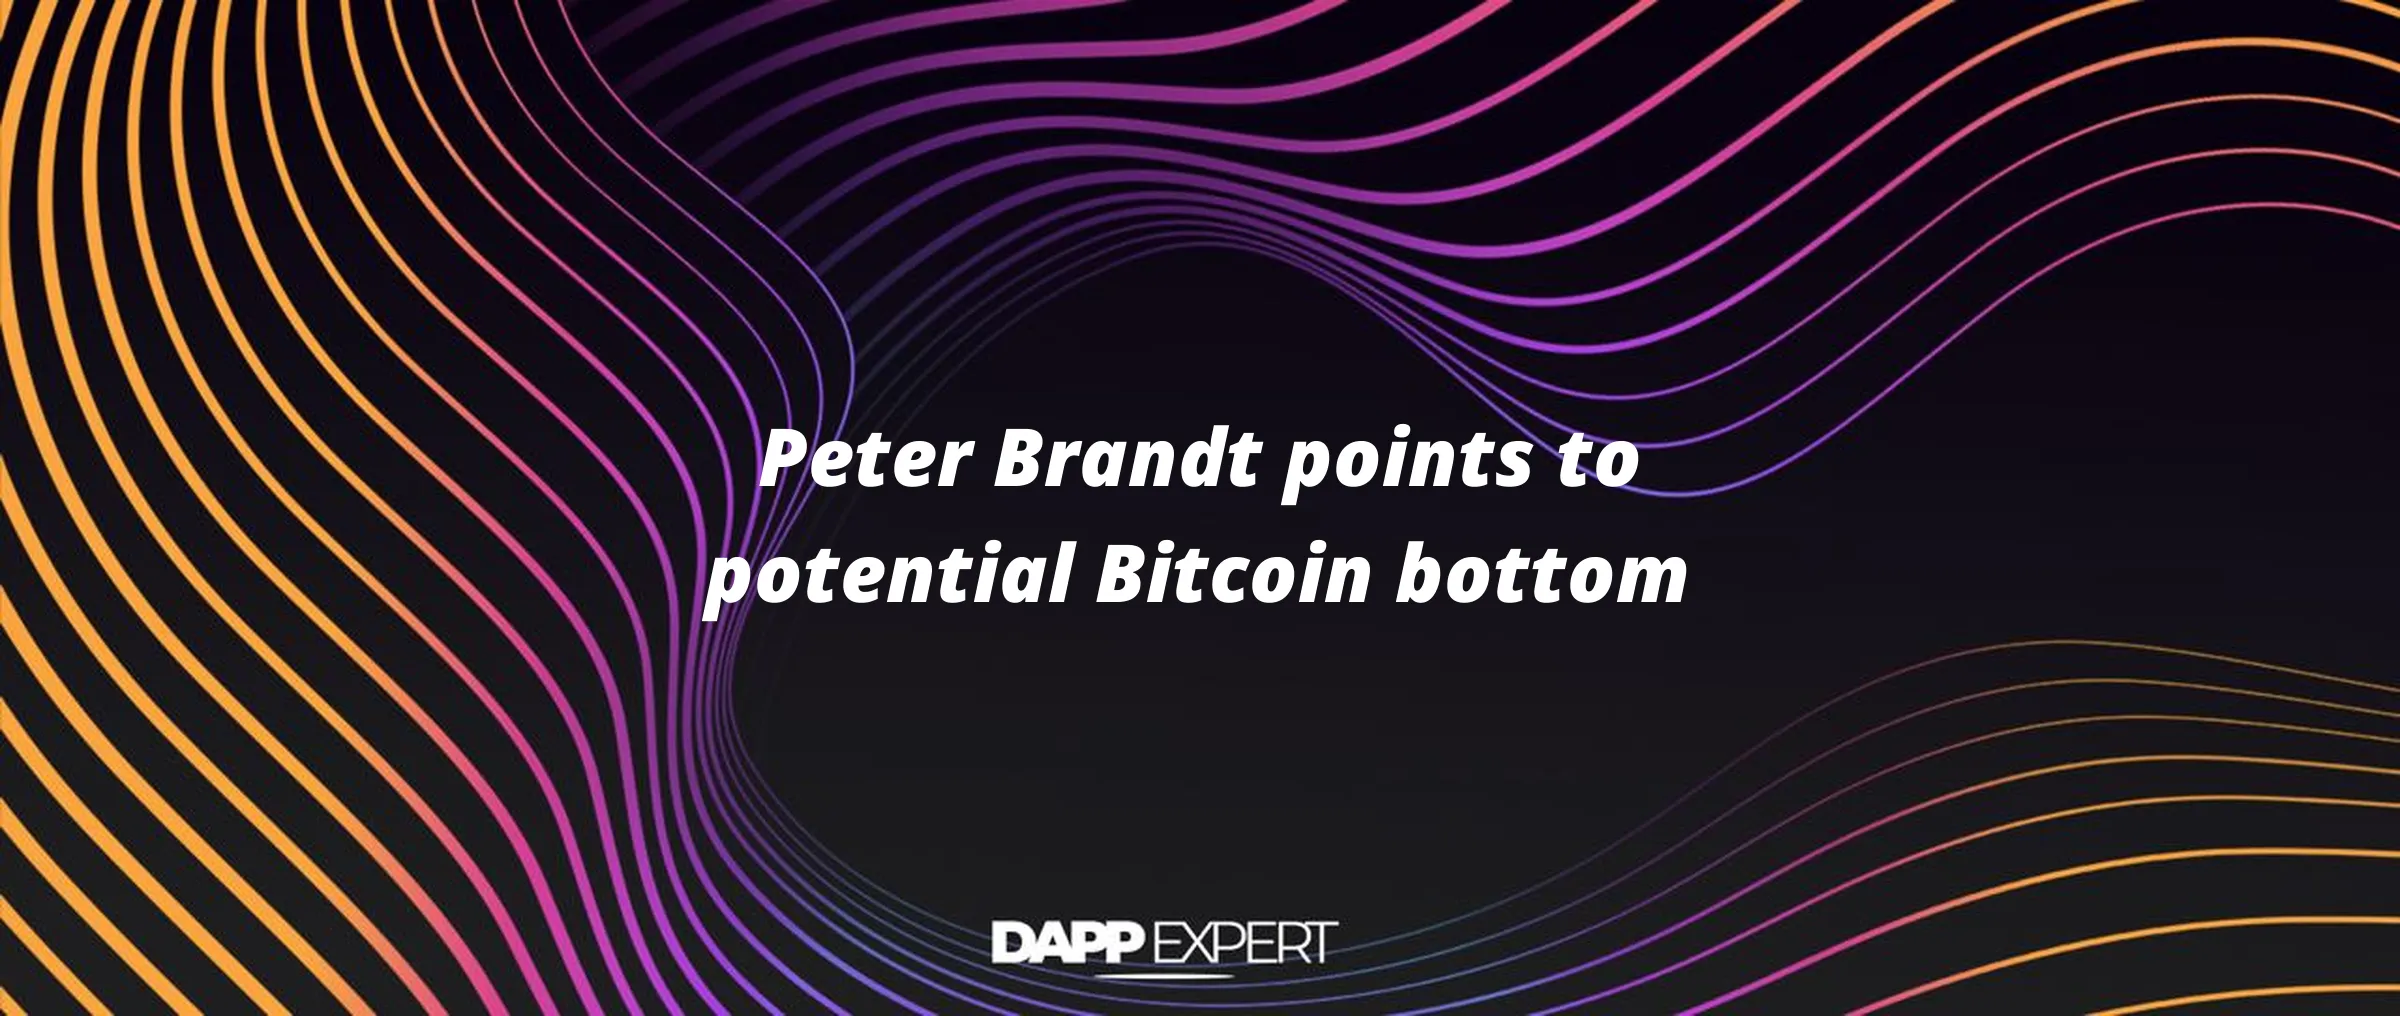 Peter Brandt points to potential Bitcoin bottom